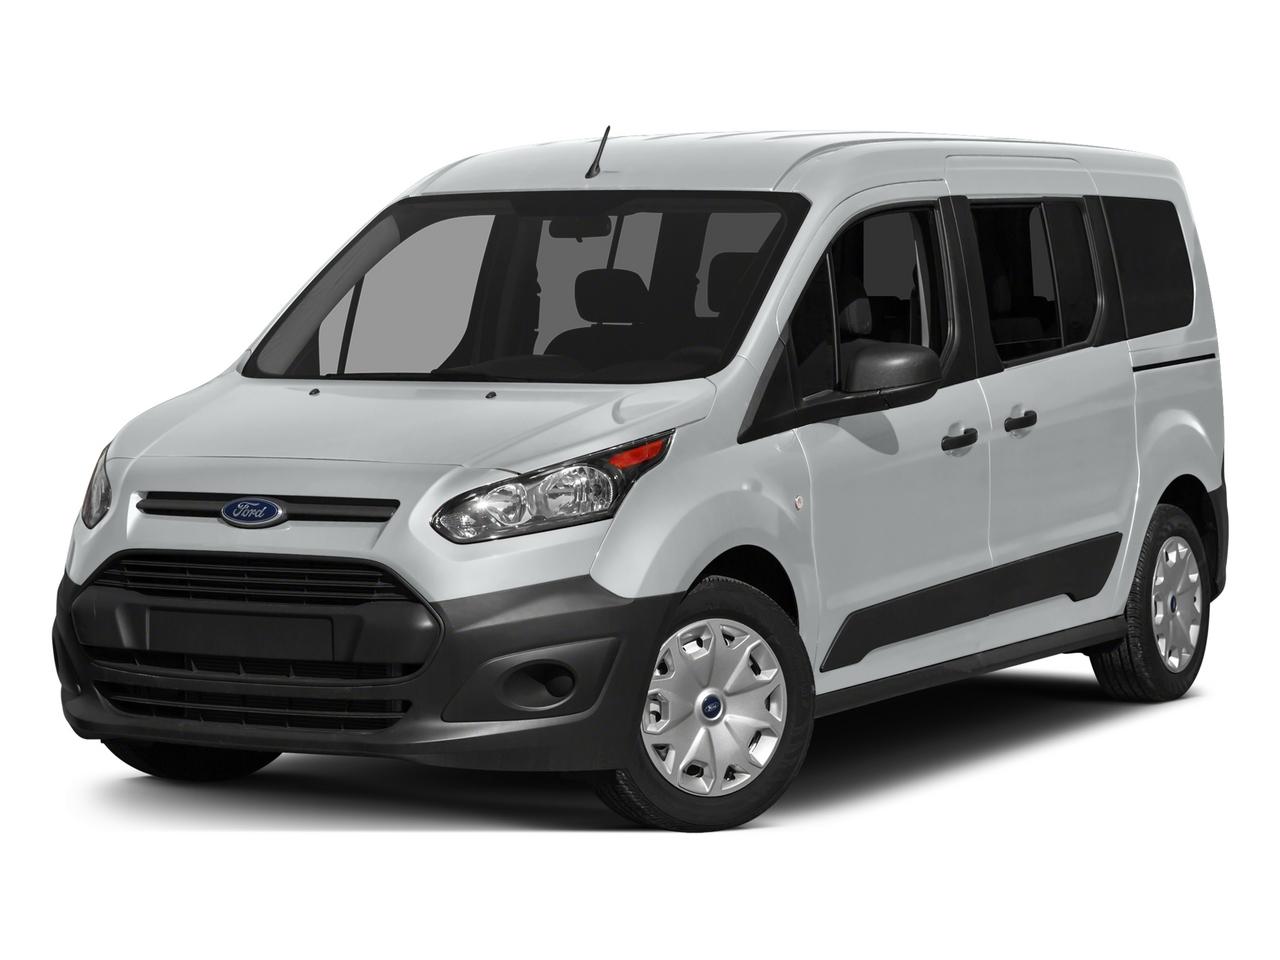 2015 Ford Transit Connect Wagon Vehicle Photo in Saint Charles, IL 60174